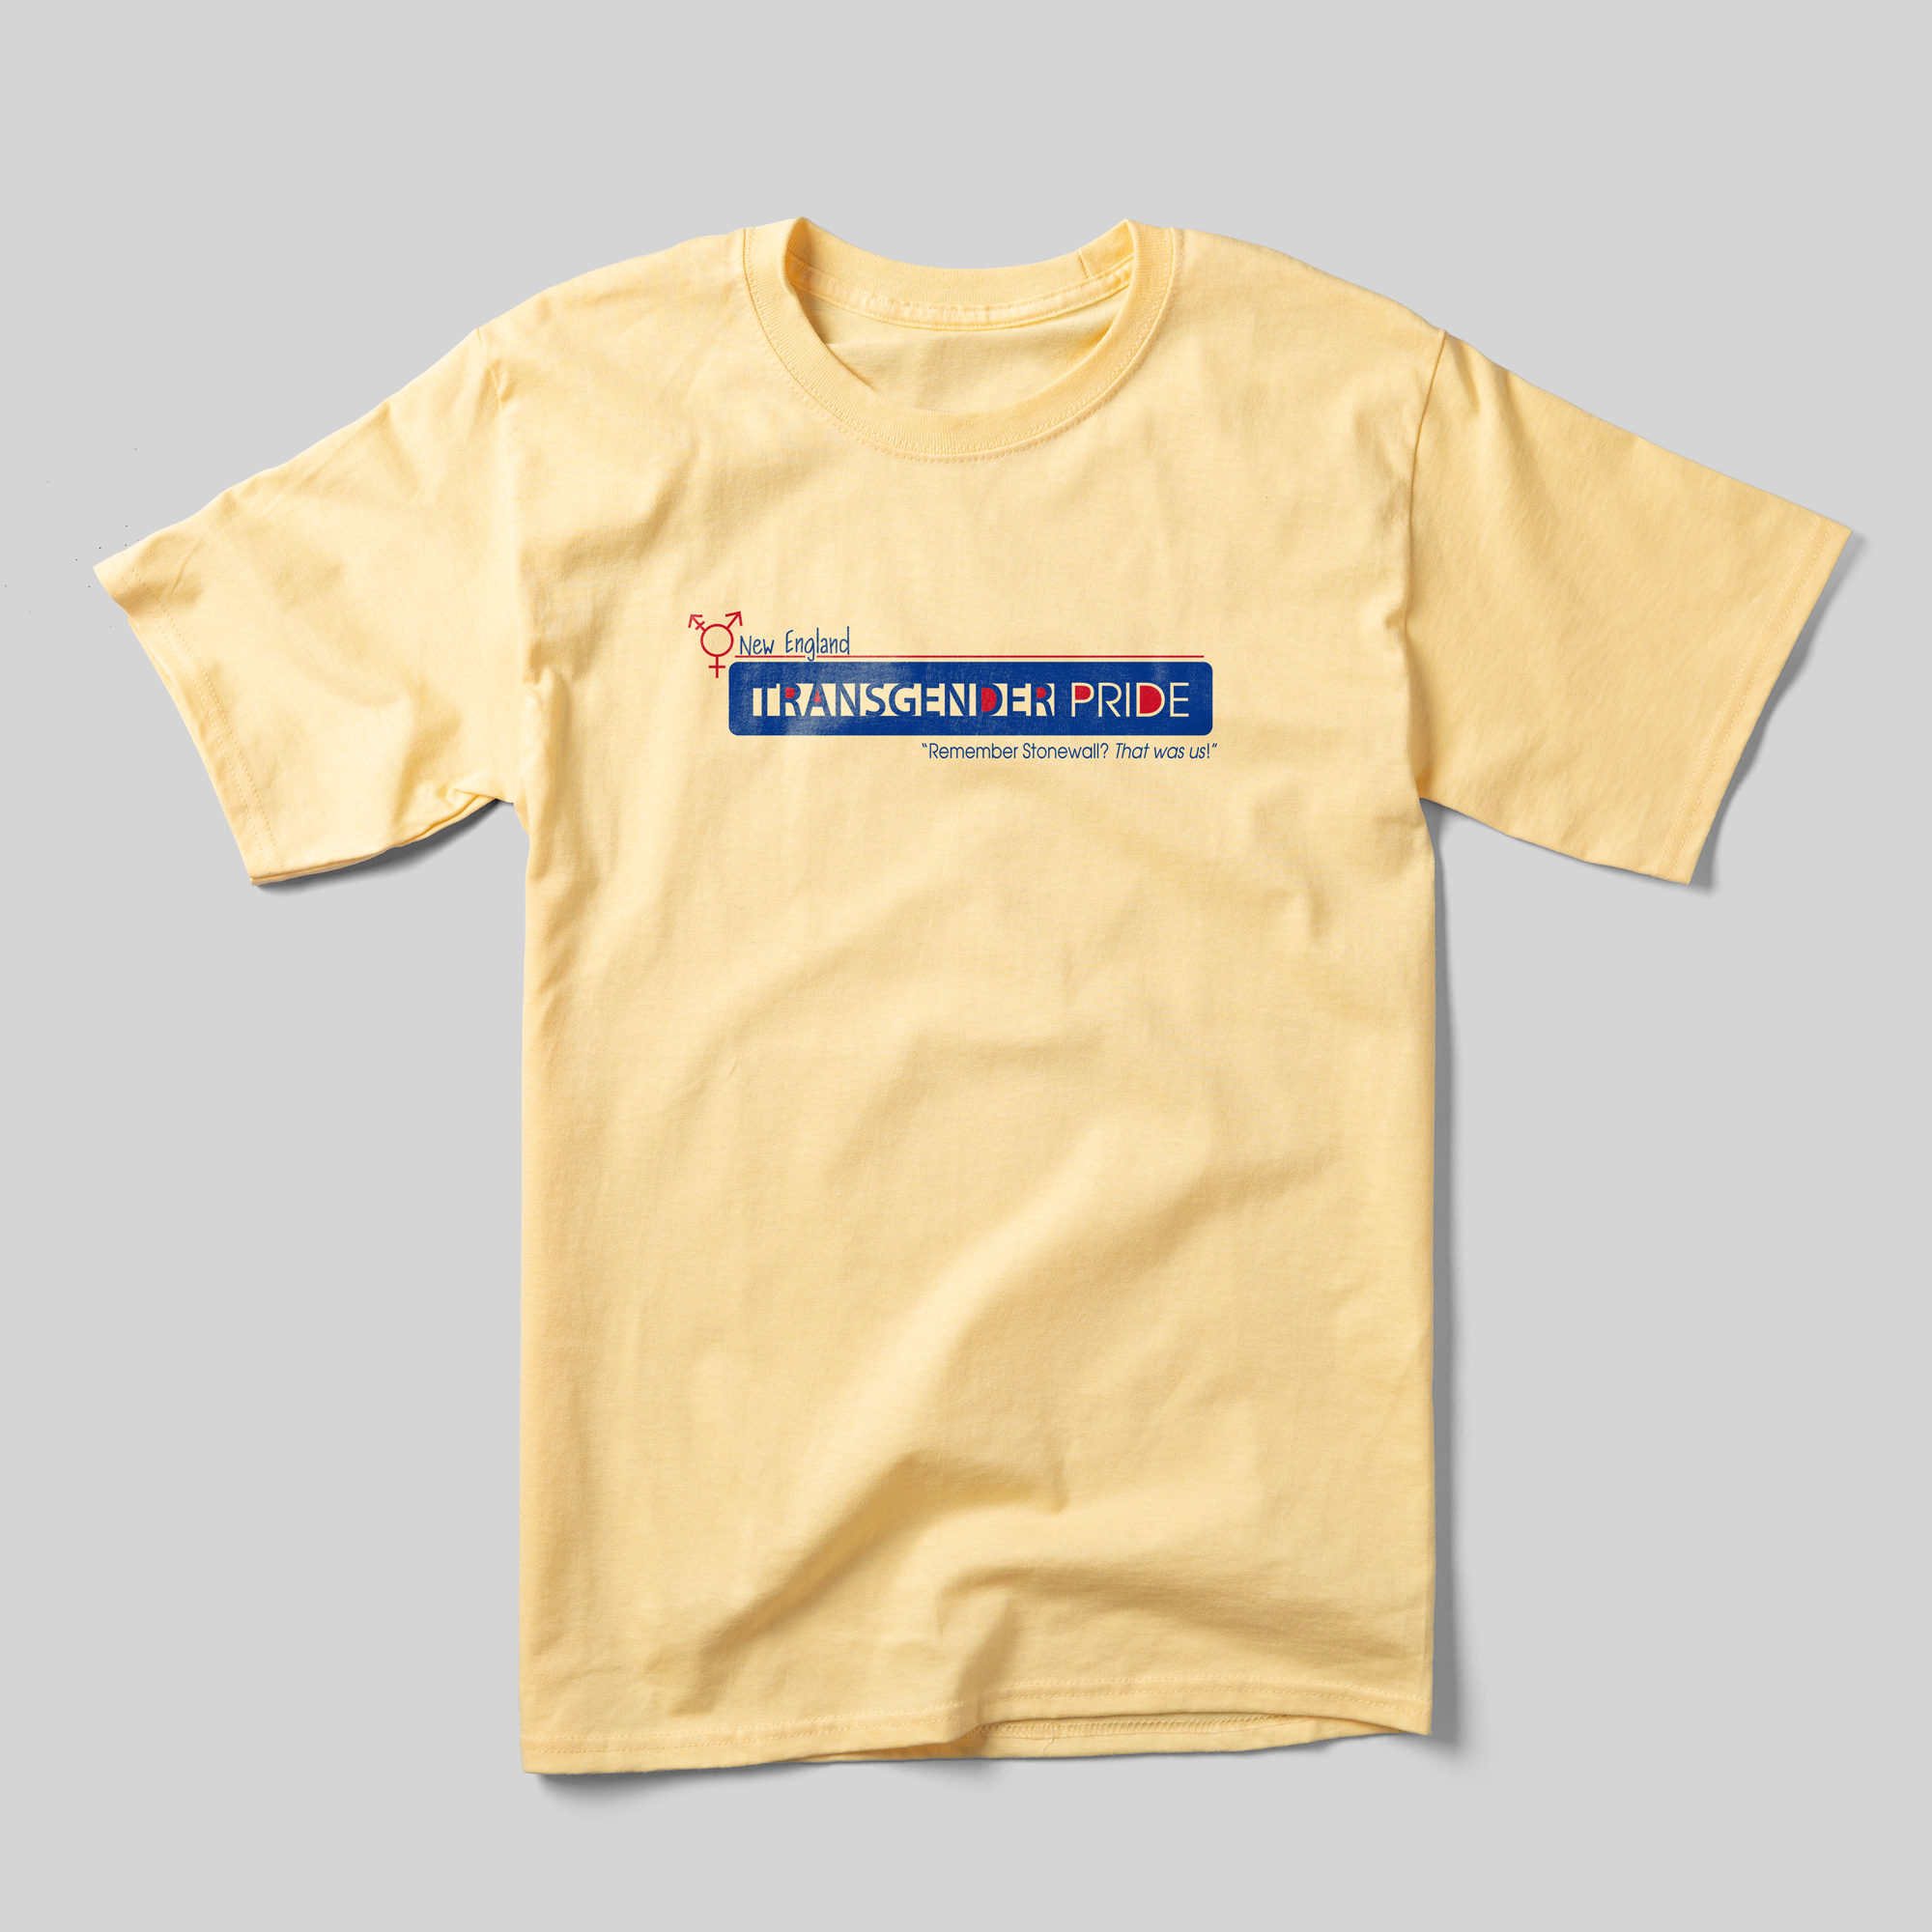 A yellow t-shirt that reads "New England Transgender Pride" with "'Remember Stonewall? That was us!'" beneath it. The text is in deep blue and red.